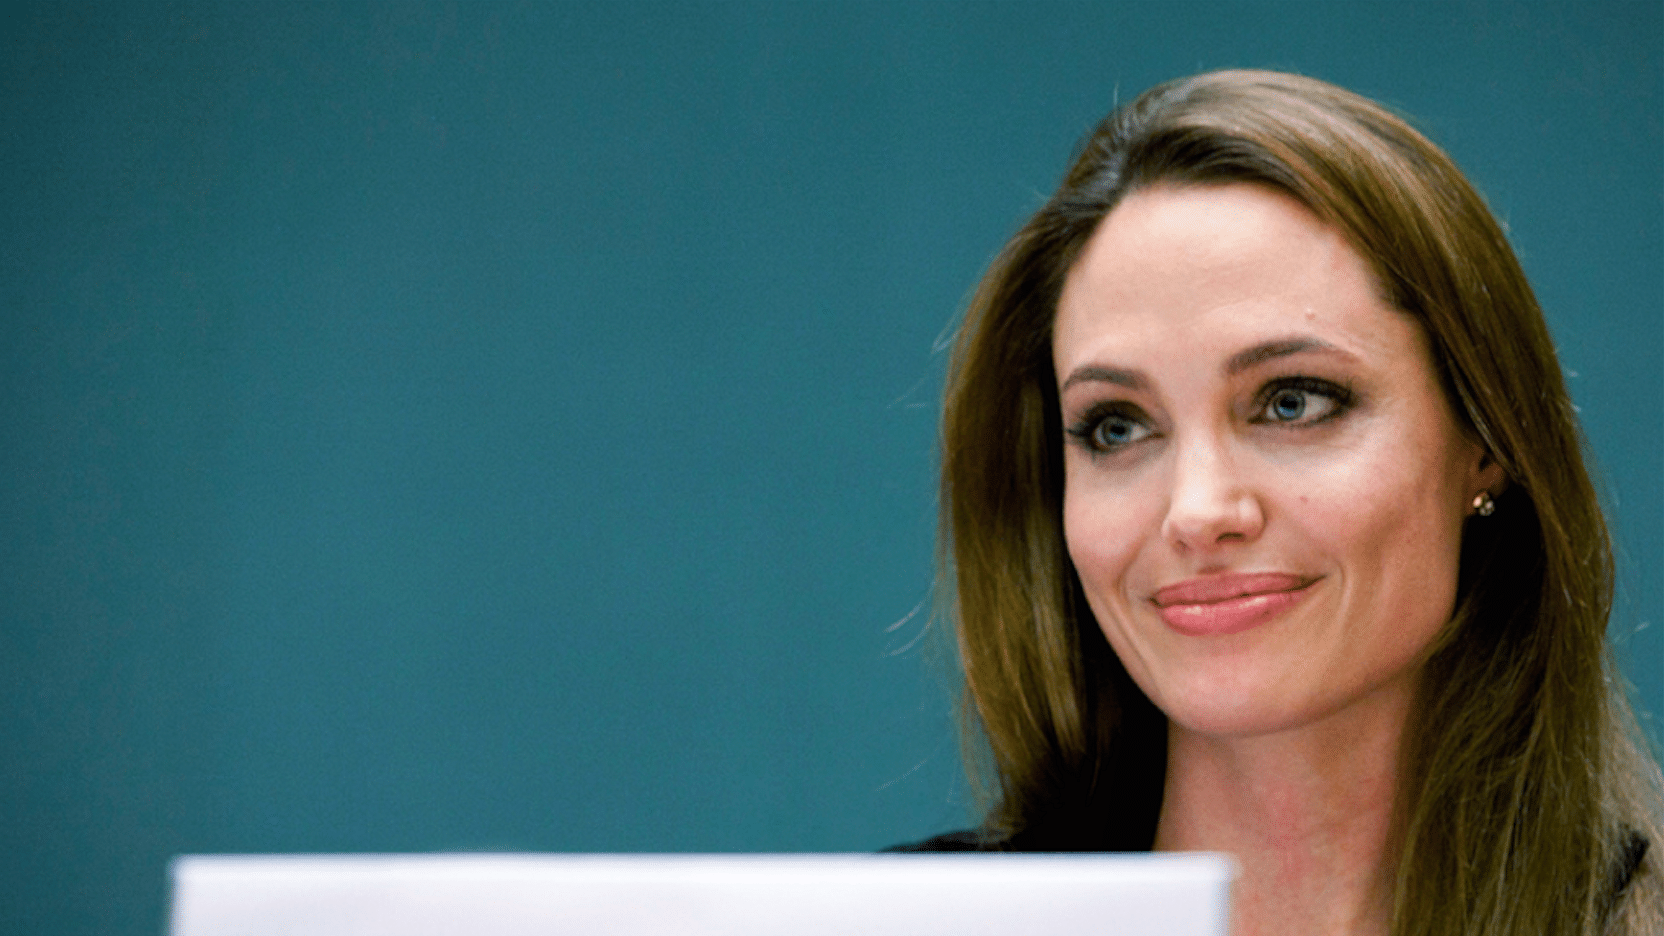 Angelina Jolie says she suffered from Bell’s Palsy and hypertension after her separation from Brad Pitt.